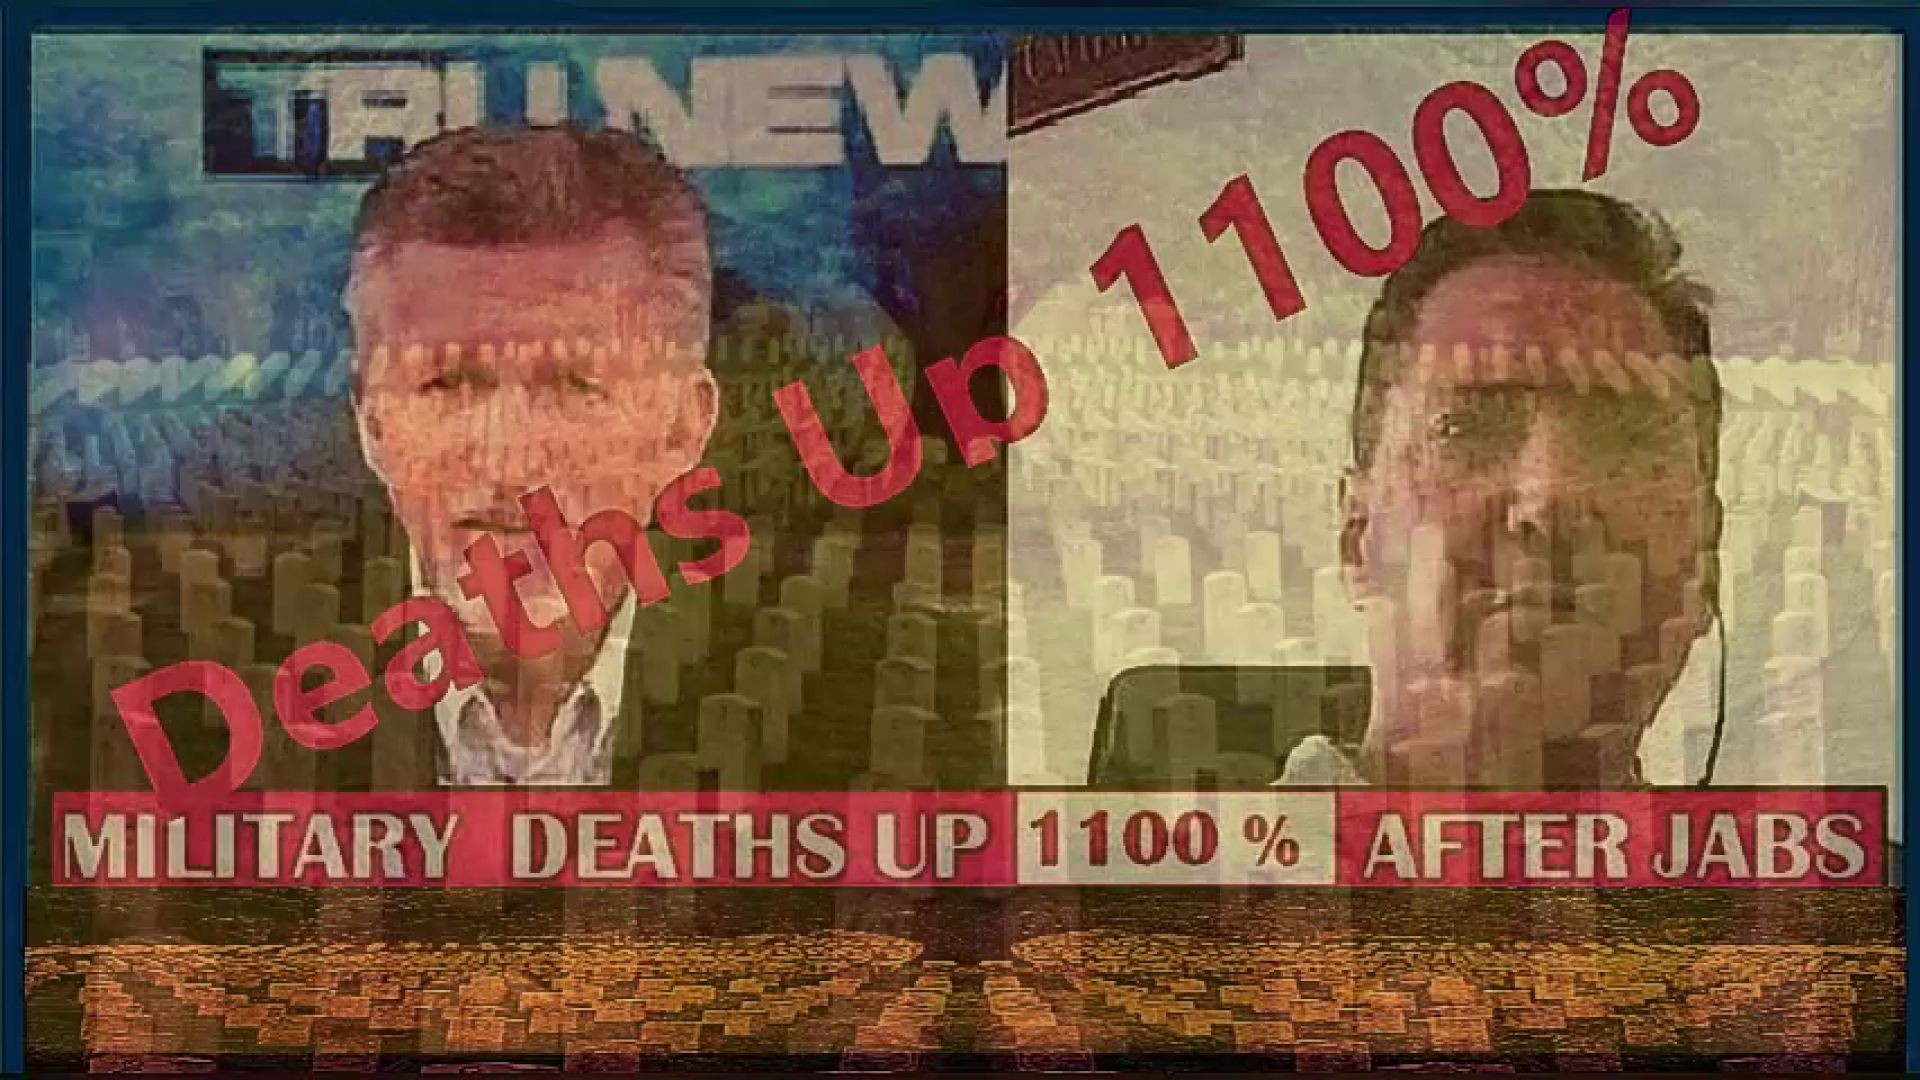 Deaths Up 1100% And Exponentially Rising. Doctors Baffled ┐( ͡° ʖ̯ ͡°)┌